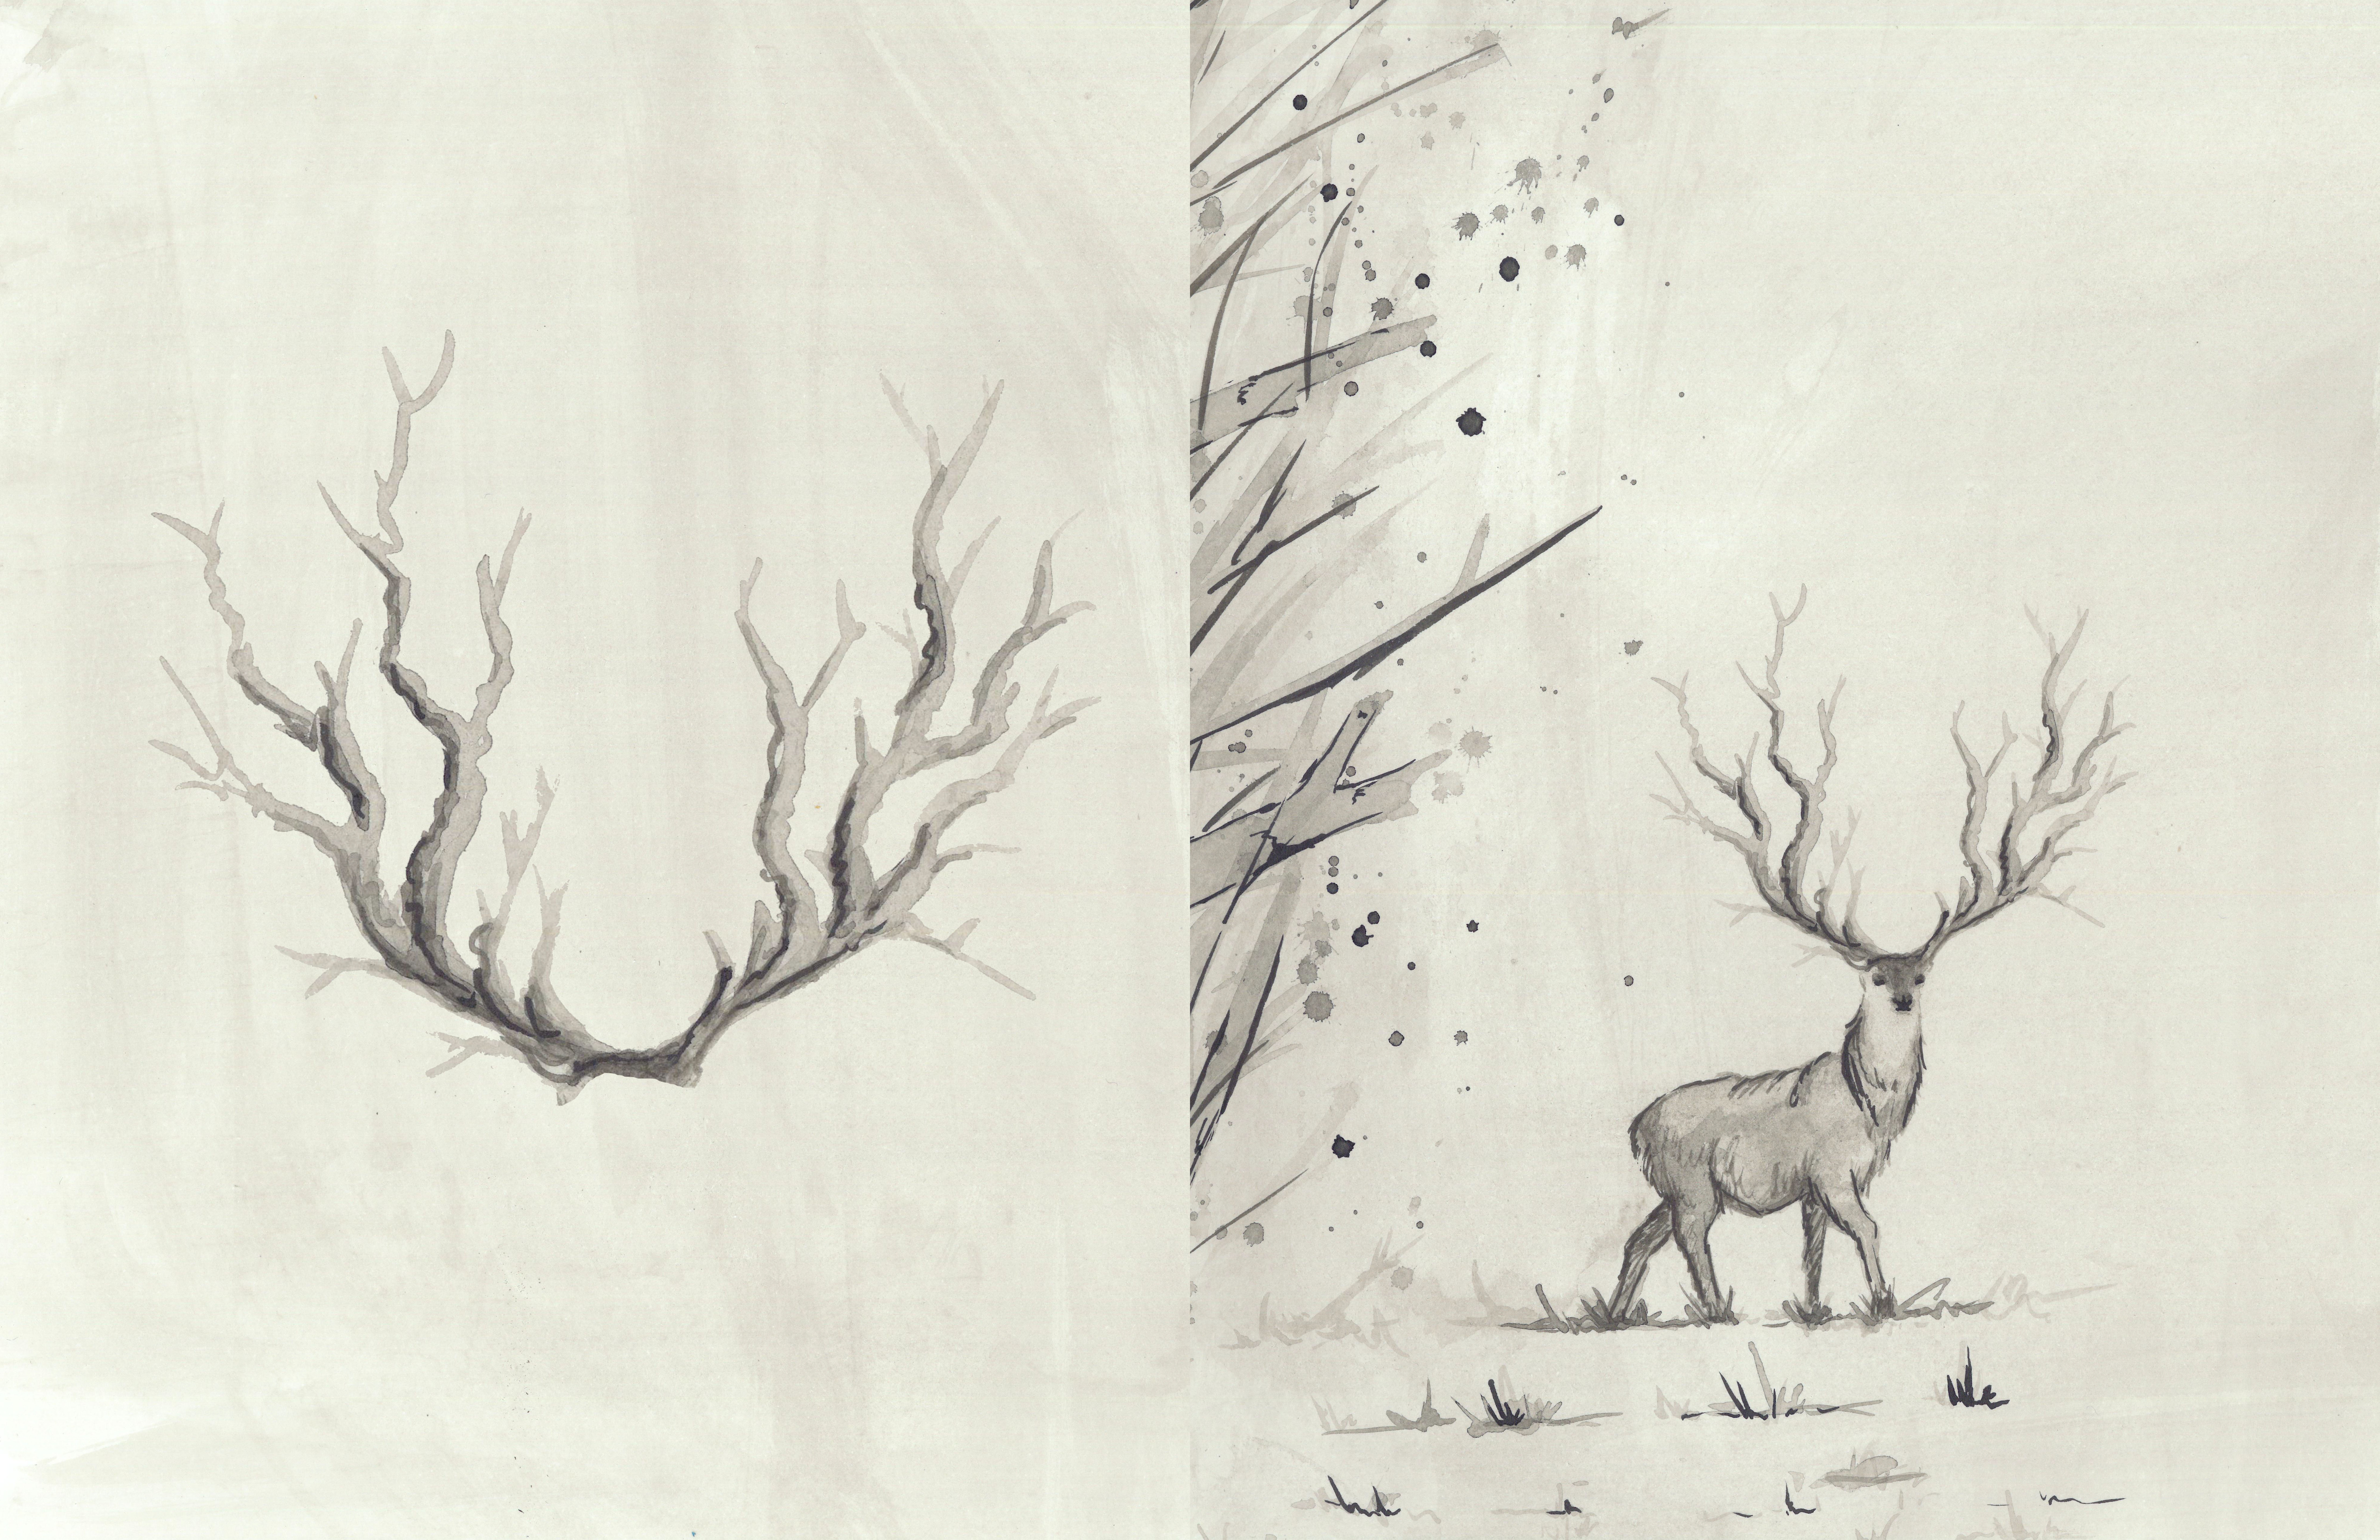 Watercolor drawing of antlers and a deer with antlers